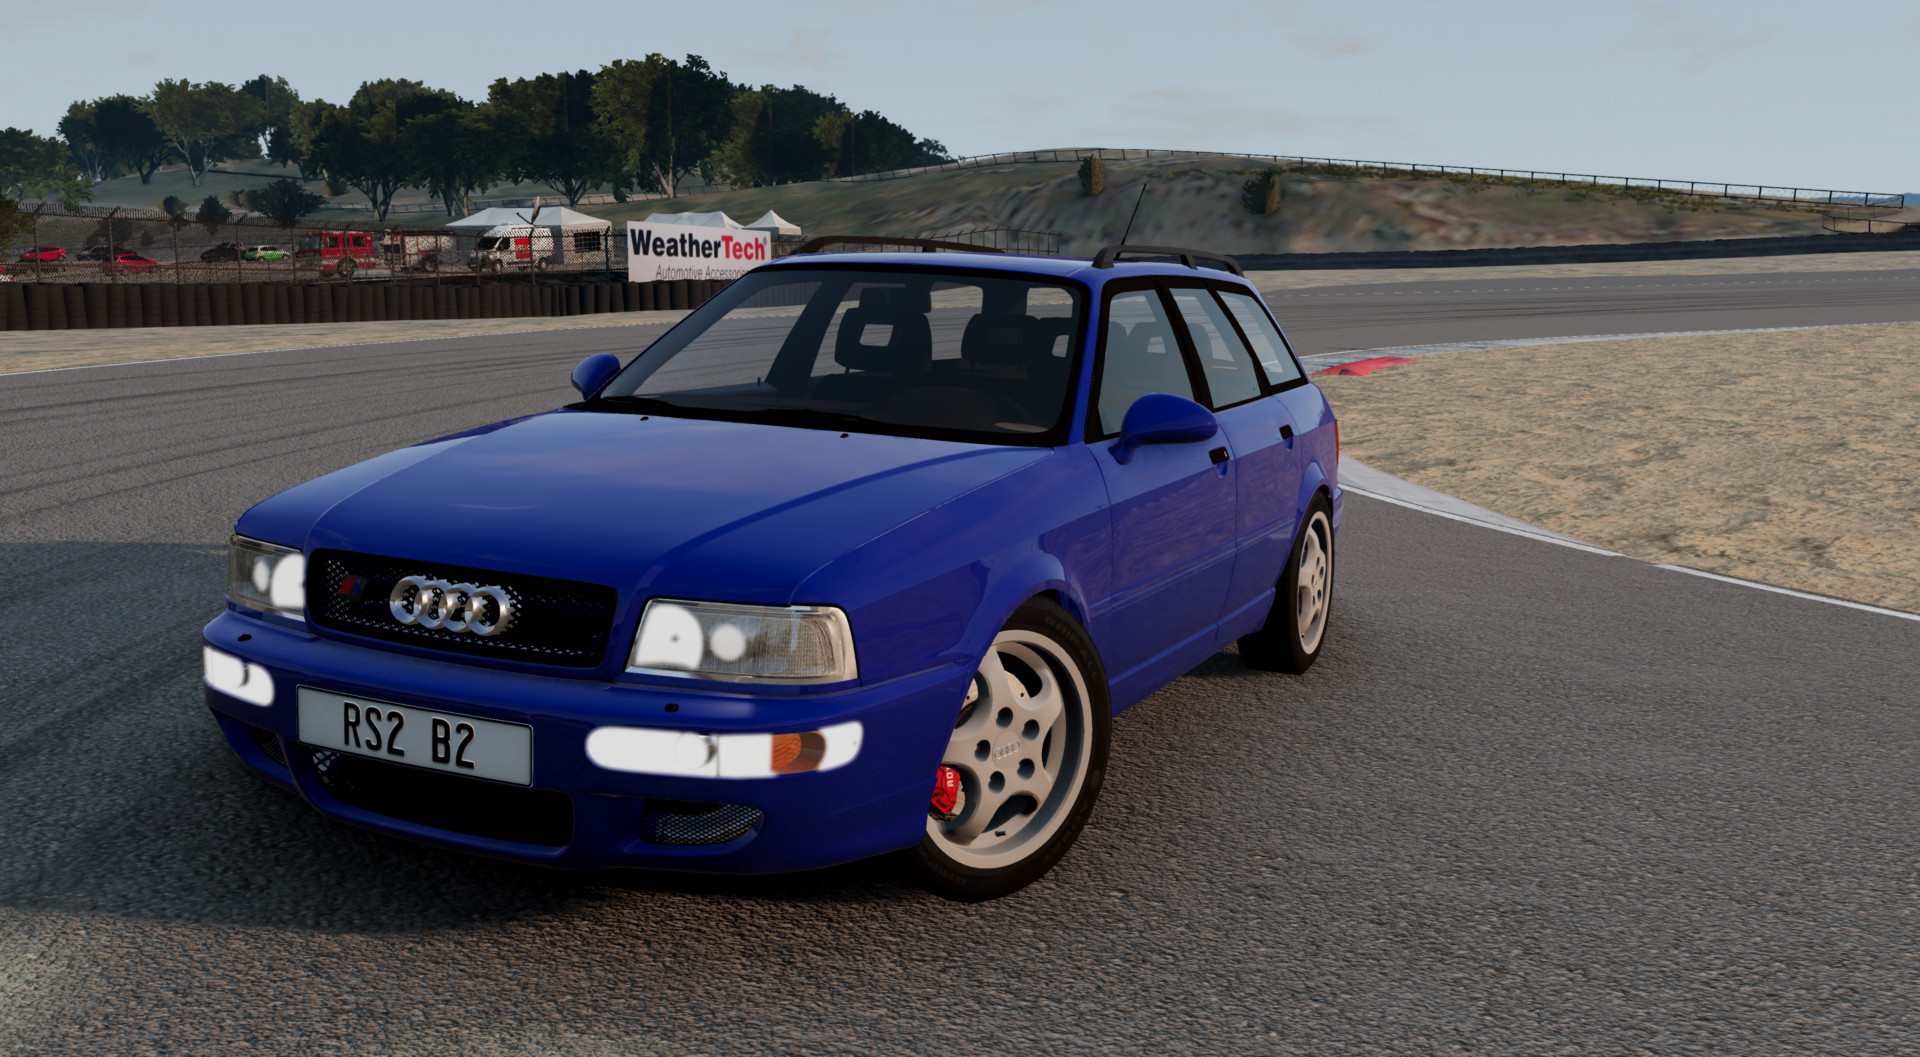 Audi A80 and RS2 B2 Release